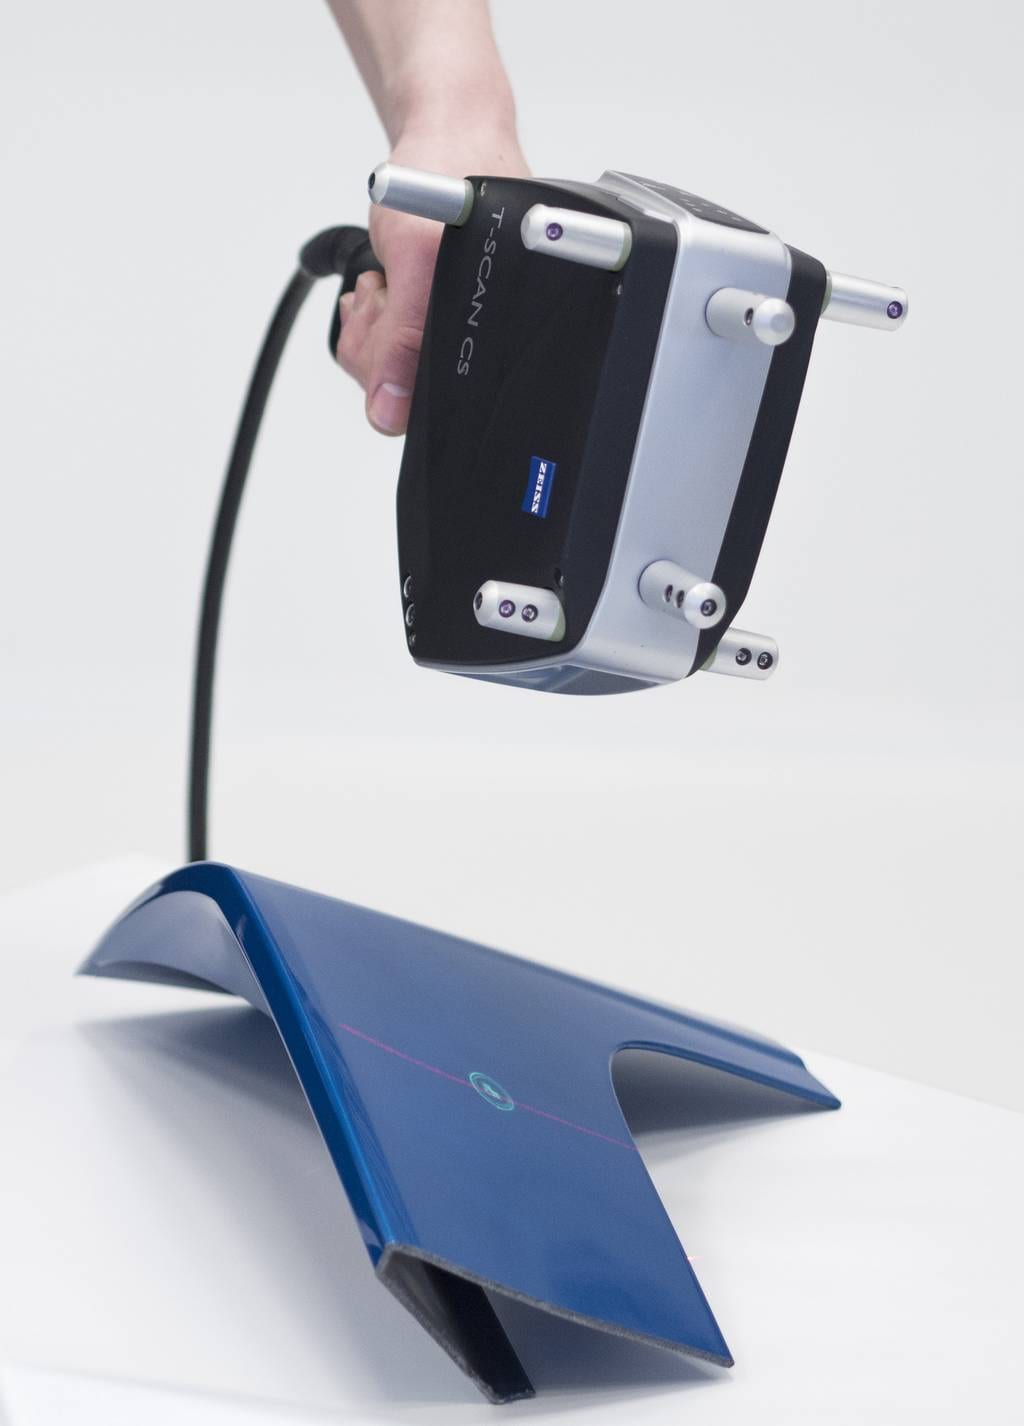 ZEISS T-POINT Touch Probe